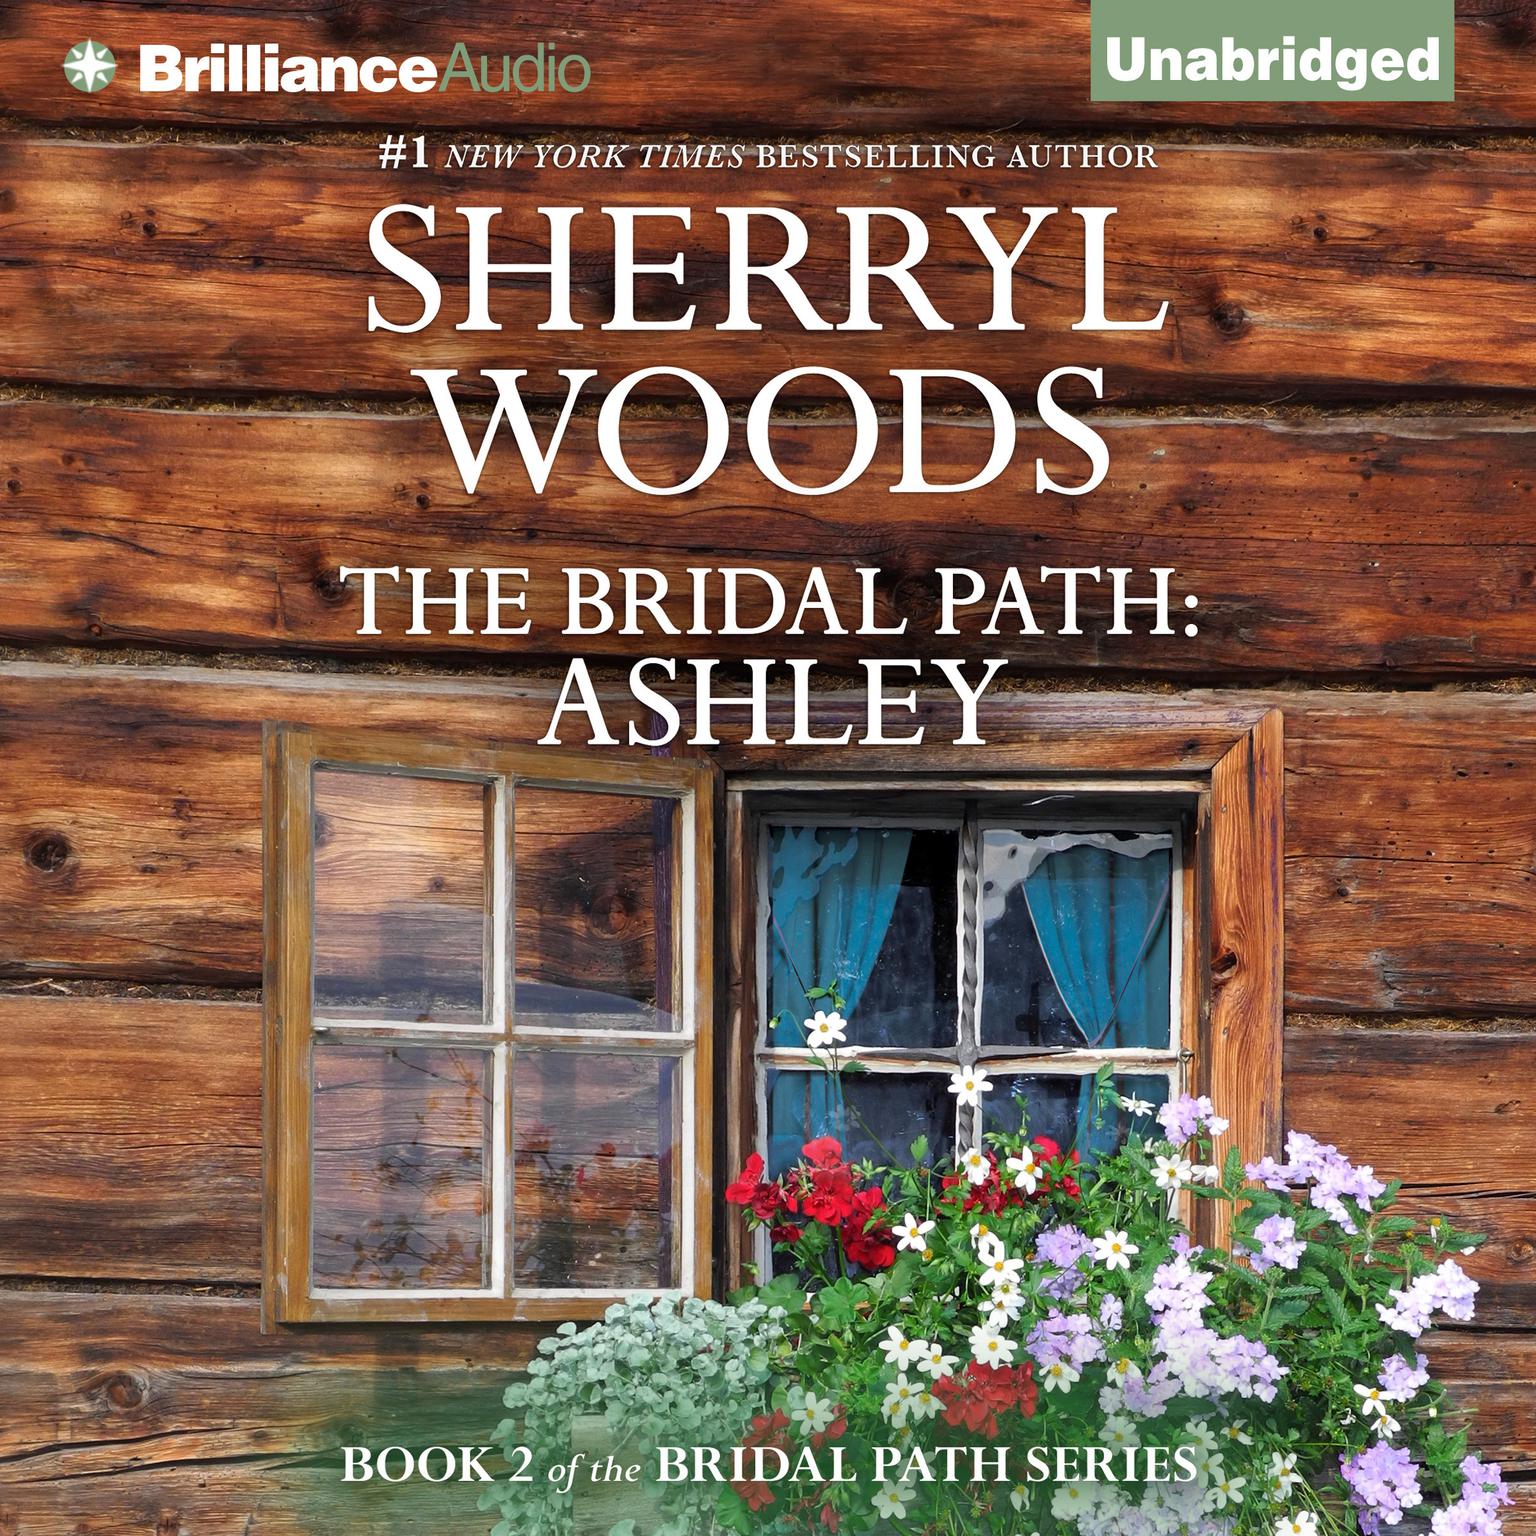 The Bridal Path: Ashley: The Bridal Path Audiobook, by Sherryl Woods